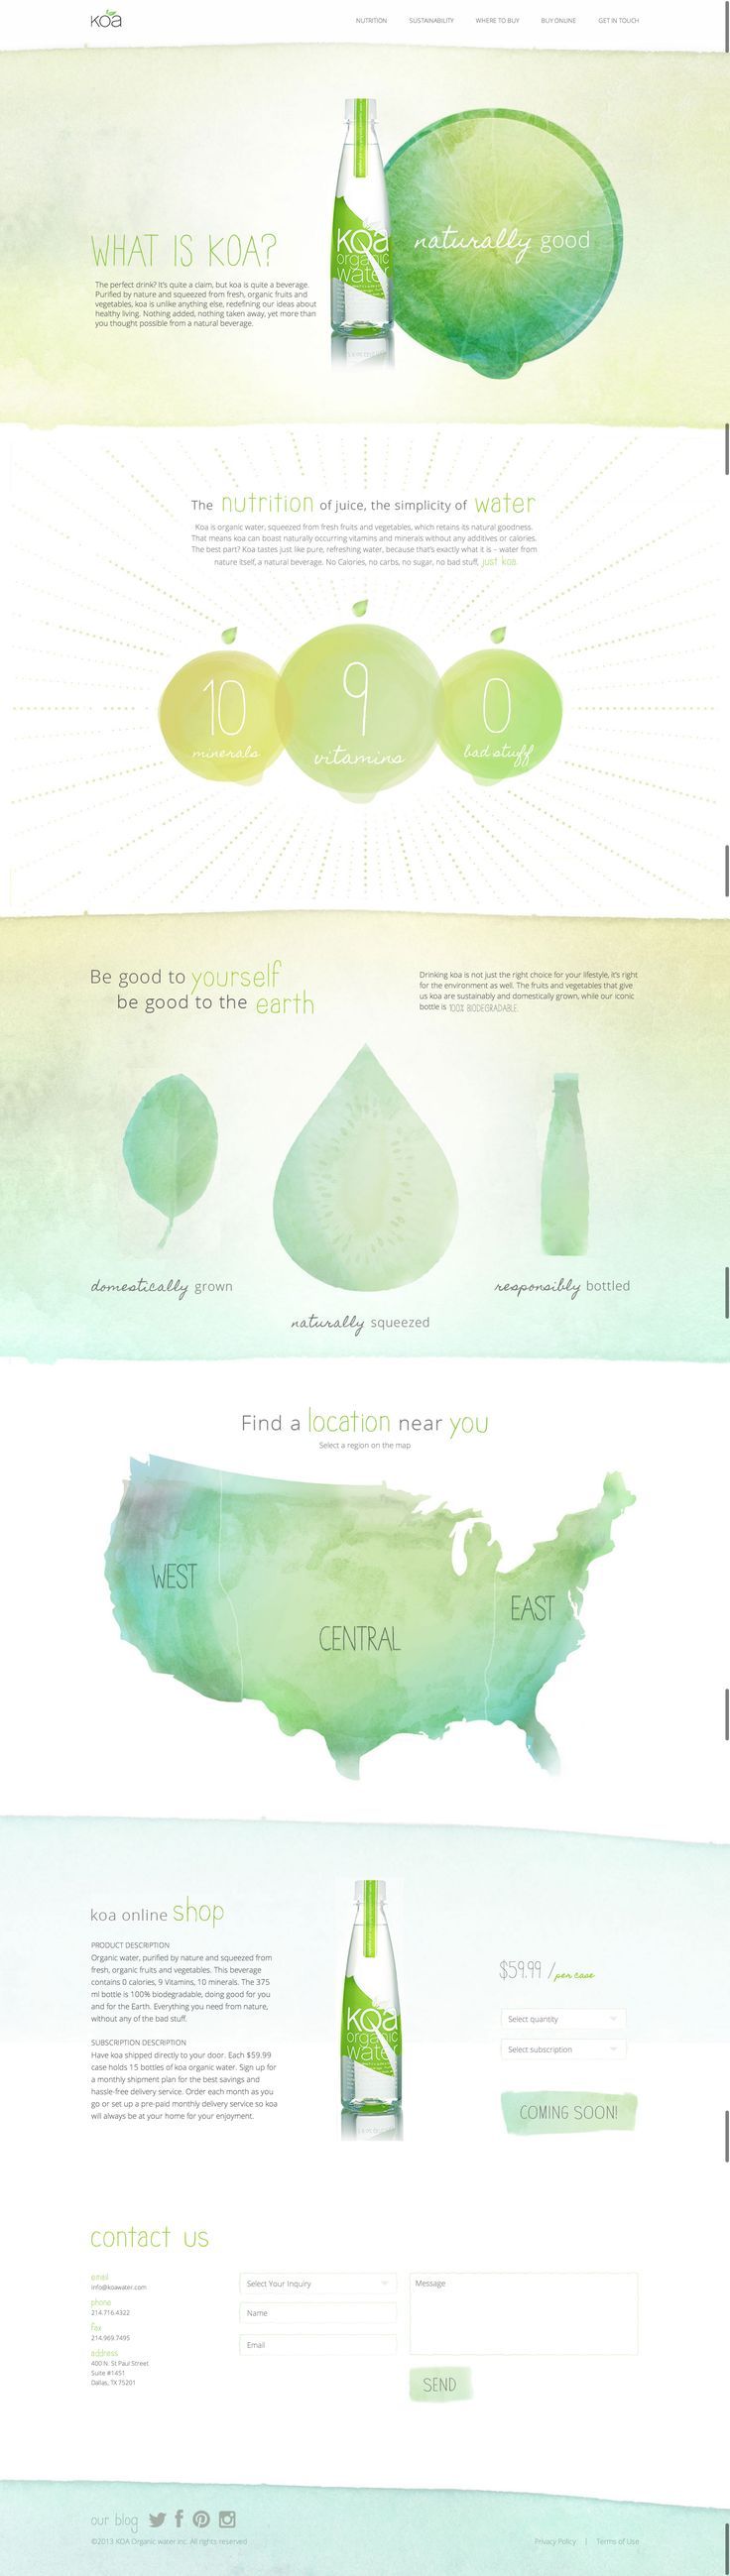 web design inspiration: water colors with lots of white space; very calming and ...